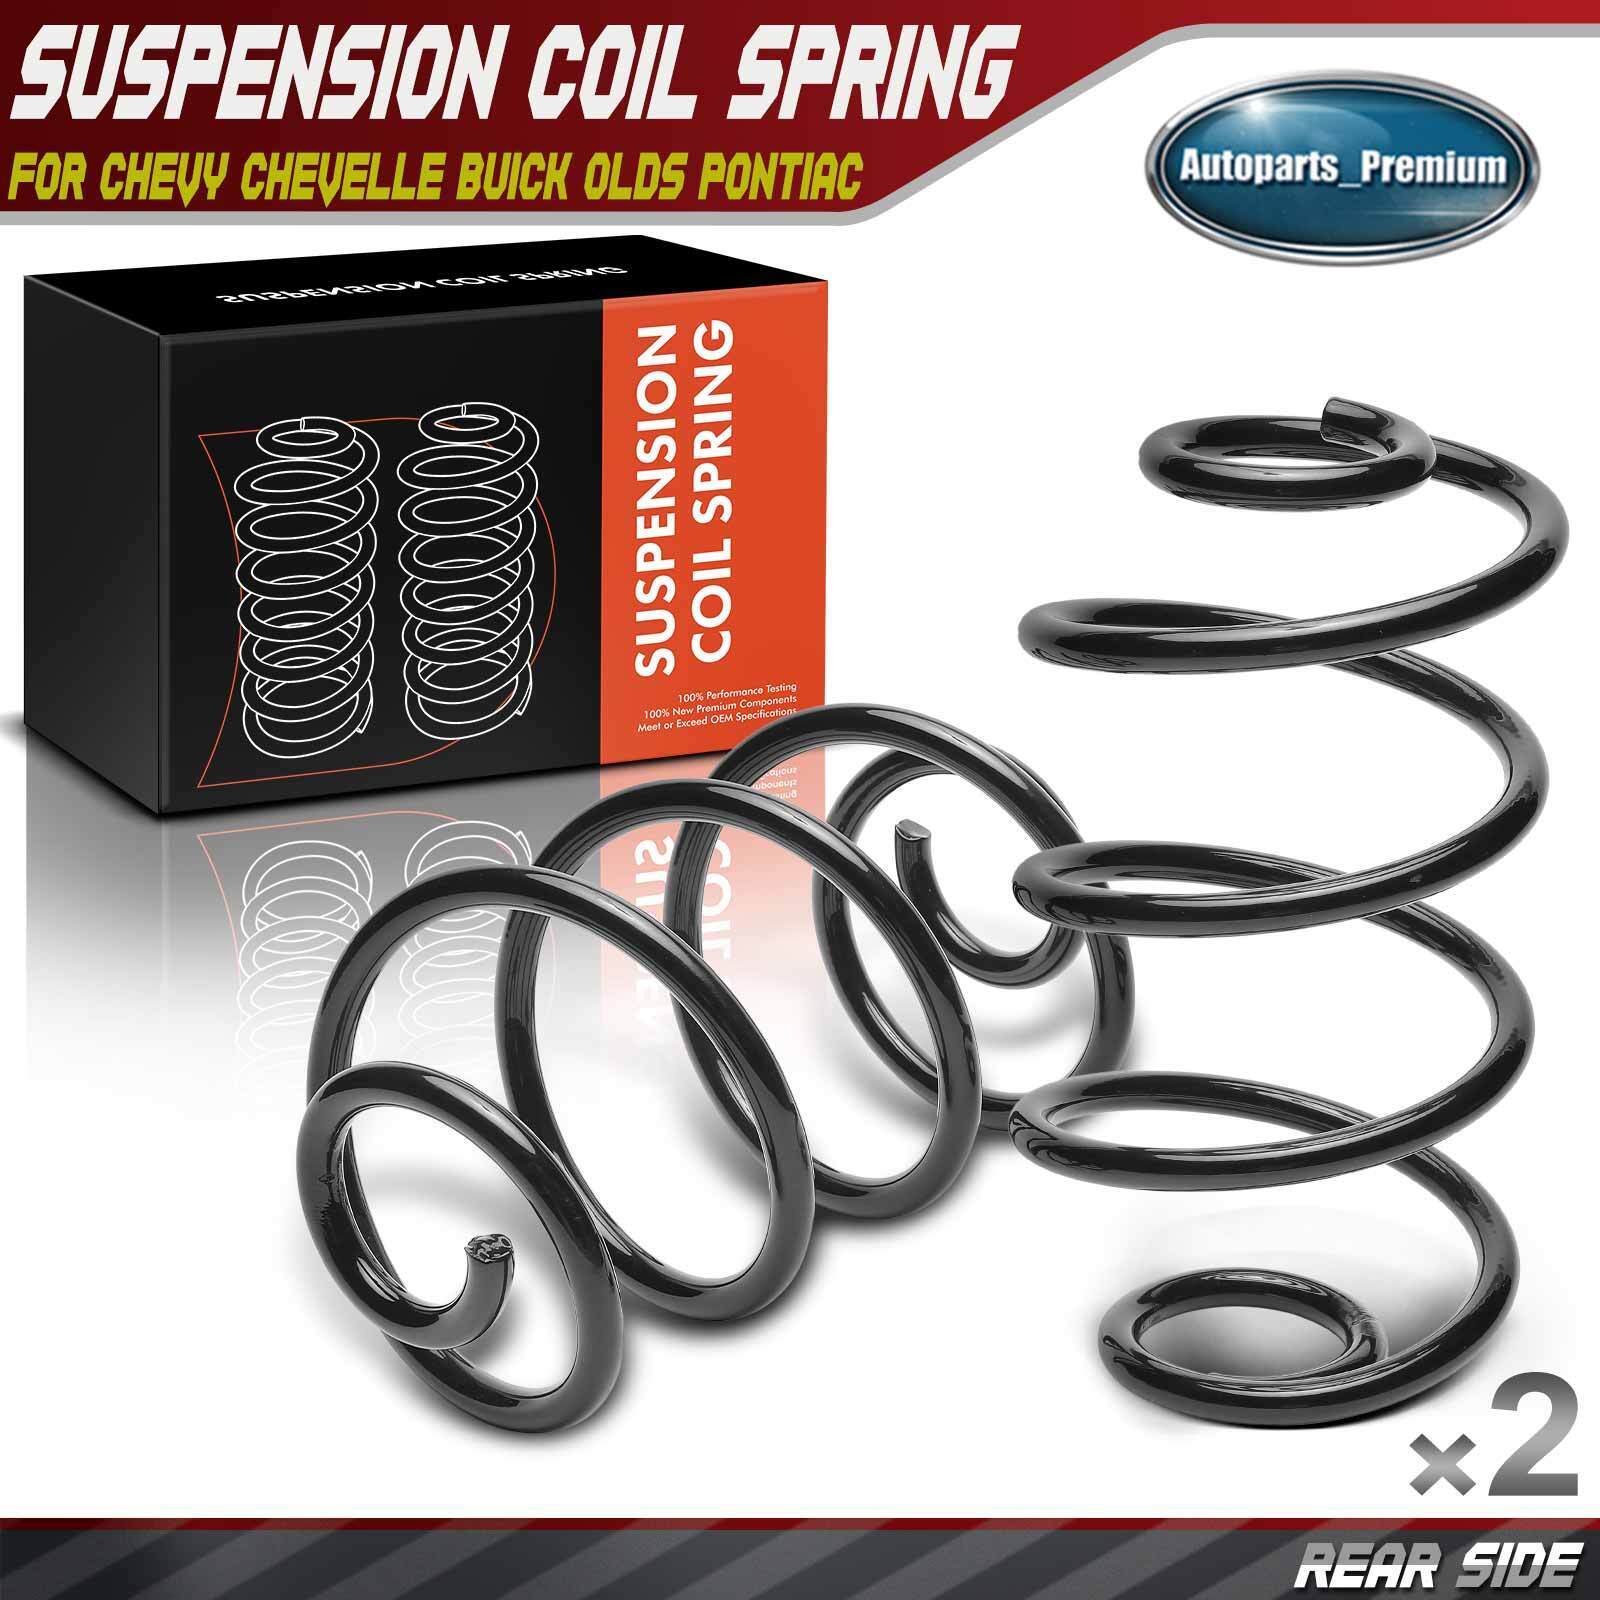 2x Rear Coil Springs for Chevrolet Chevelle 1967-1972 Buick Olds Cutlass Pontiac